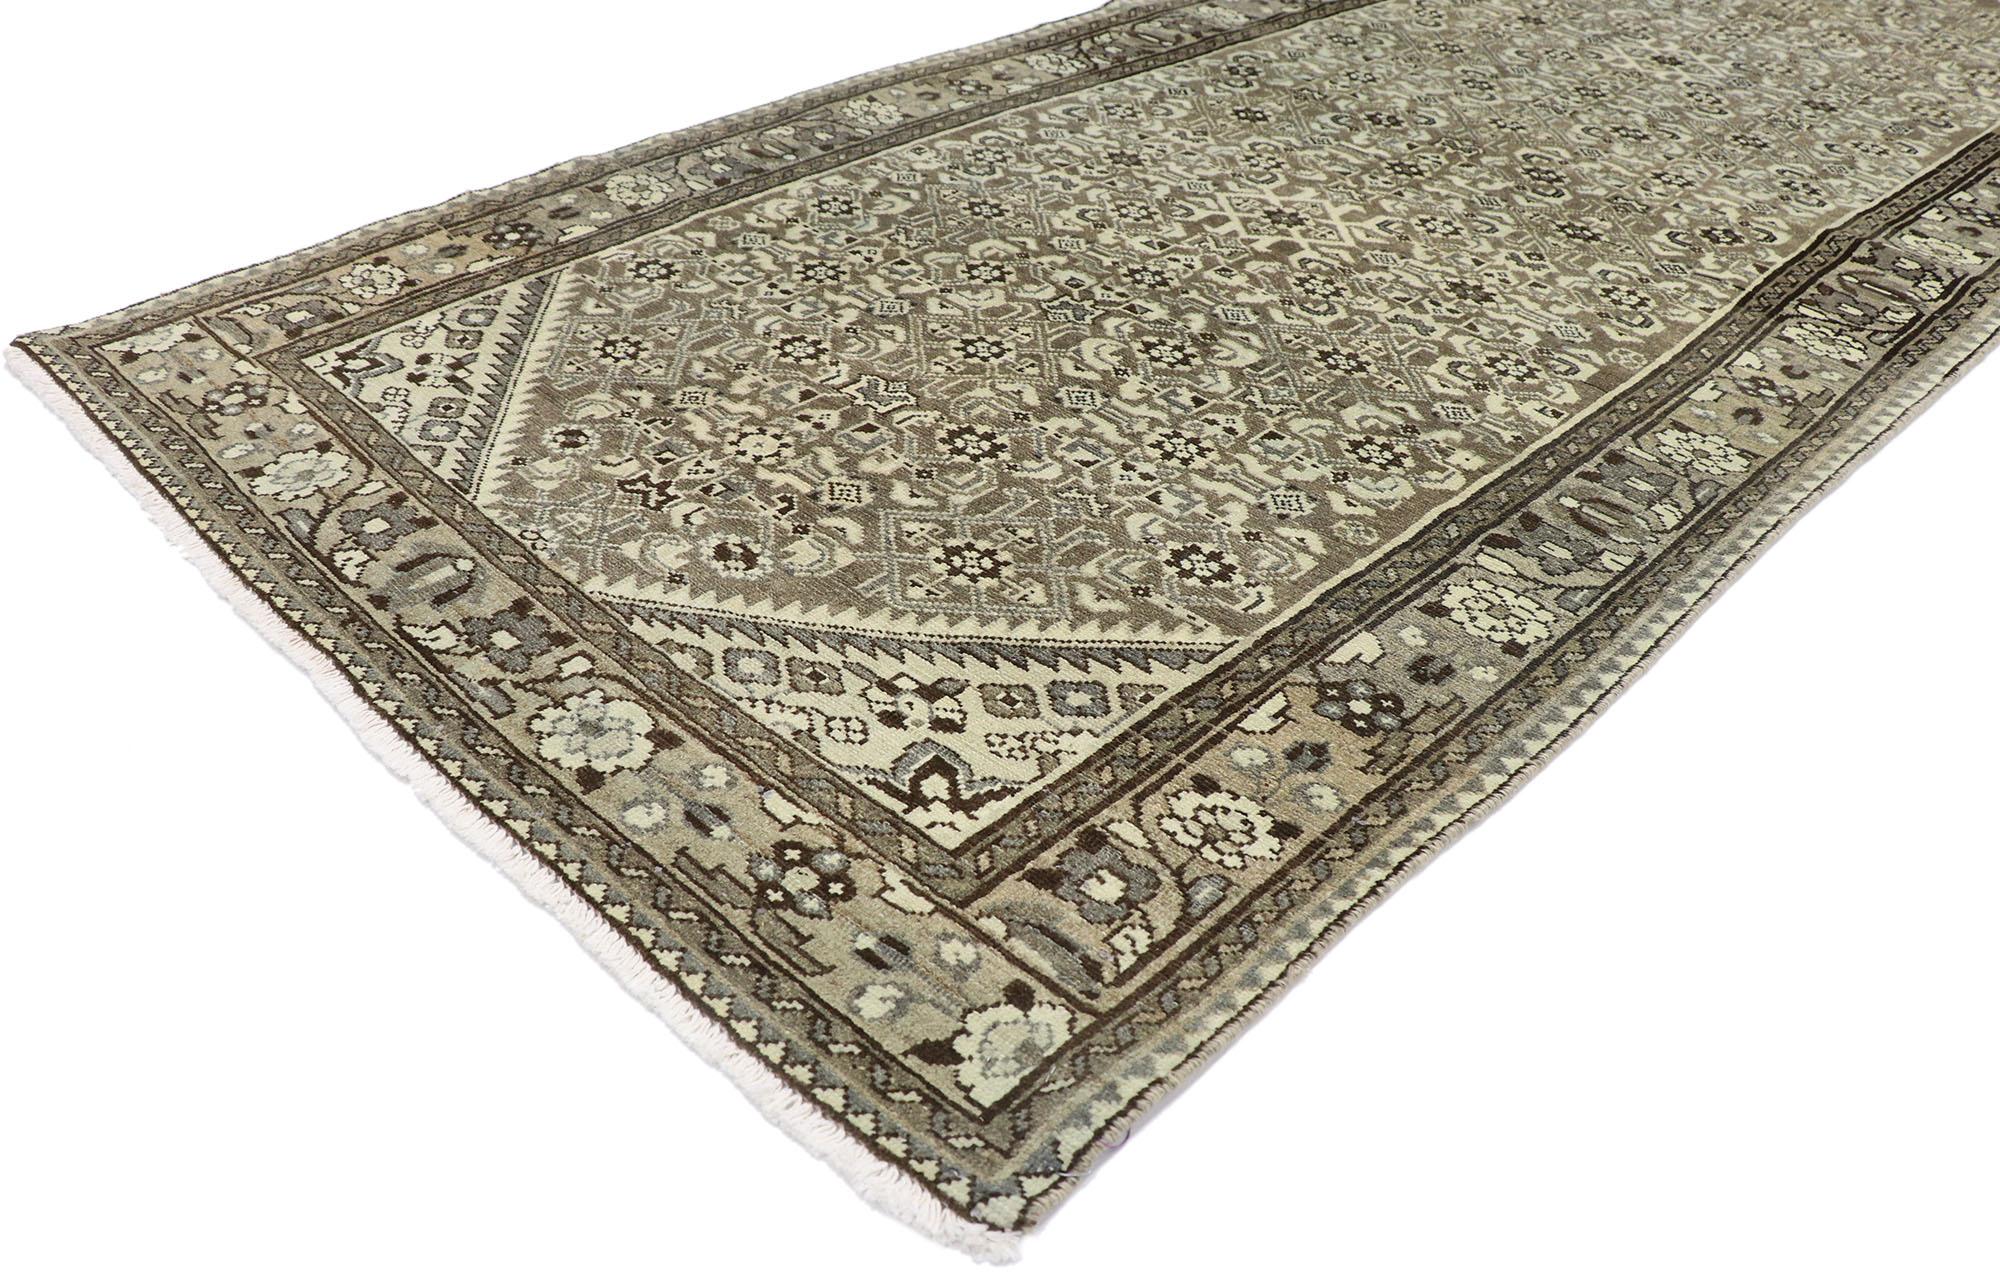 60878, distressed Antique Persian Mahal Runner with modern rustic shaker style. With its timeless design and modern industrial style with rustic sensibility, this hand knotted wool distressed antique Persian Mahal runner will take on a curated